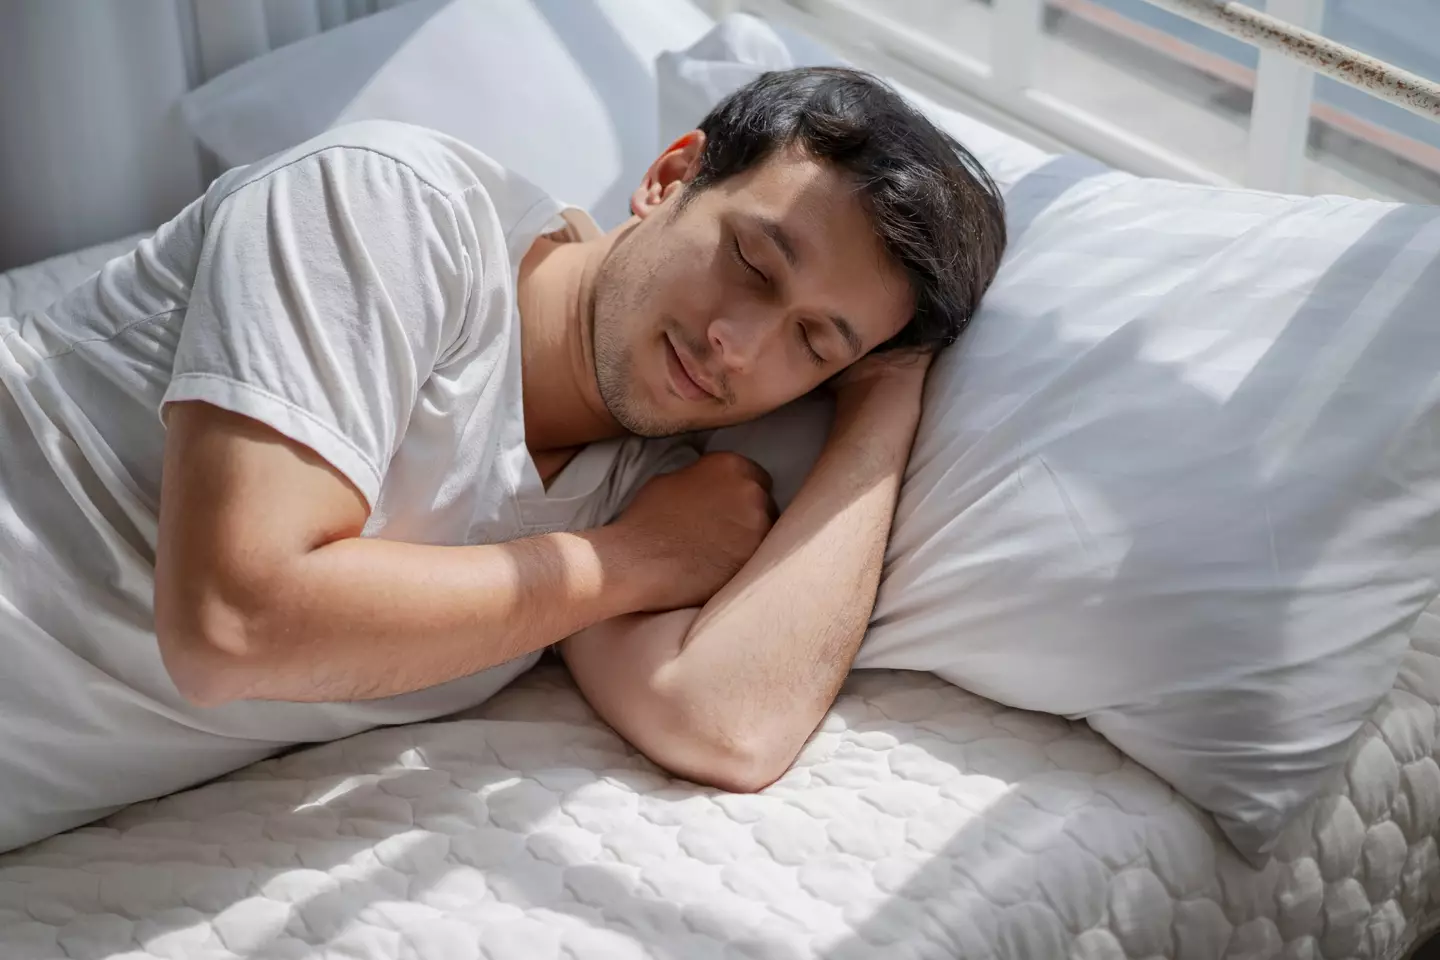 Experts suggest replacing your pillows every one to two years.